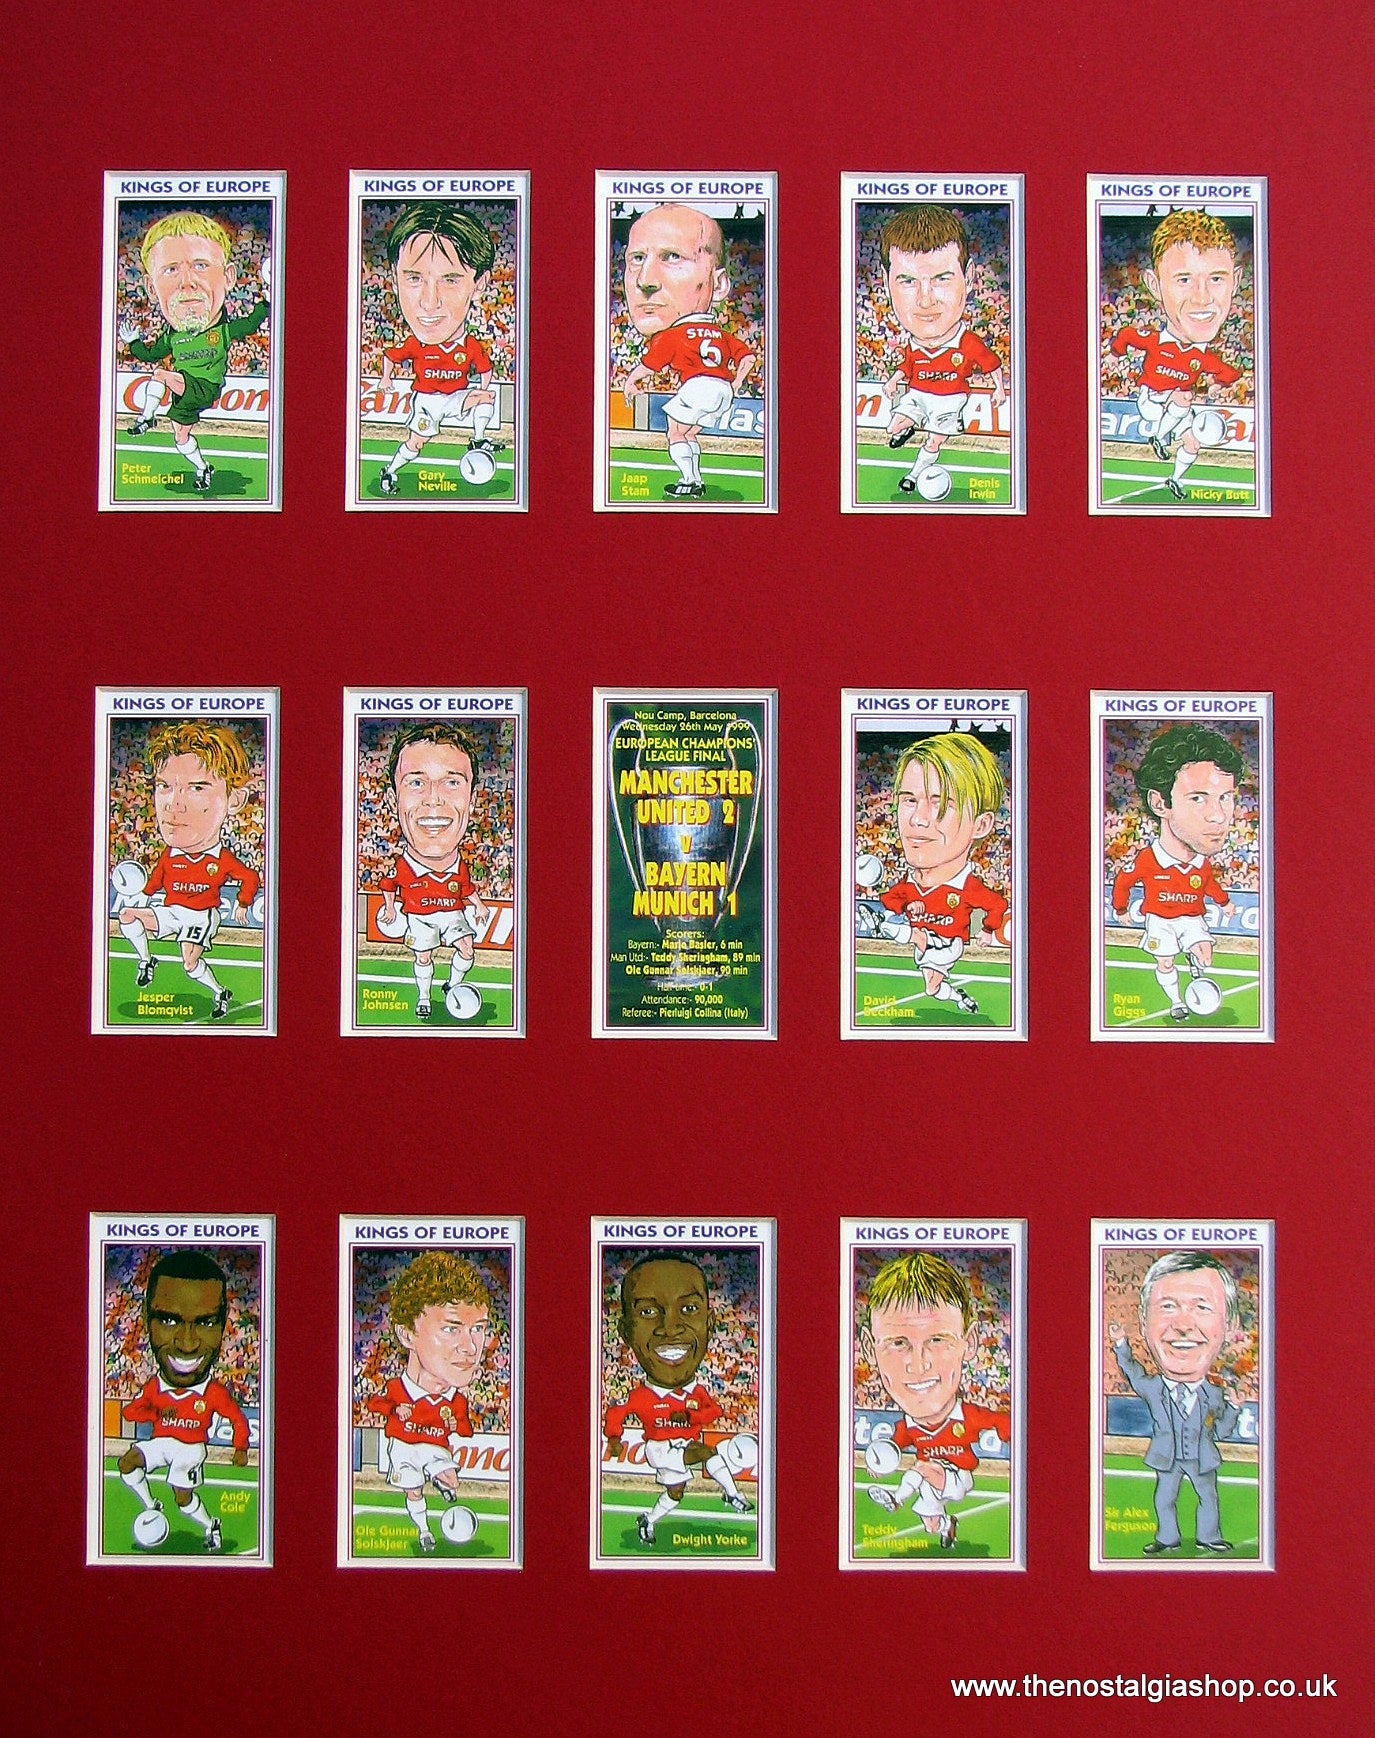 Manchester United 1999. Champions League Winners. Mounted Football Card Set.